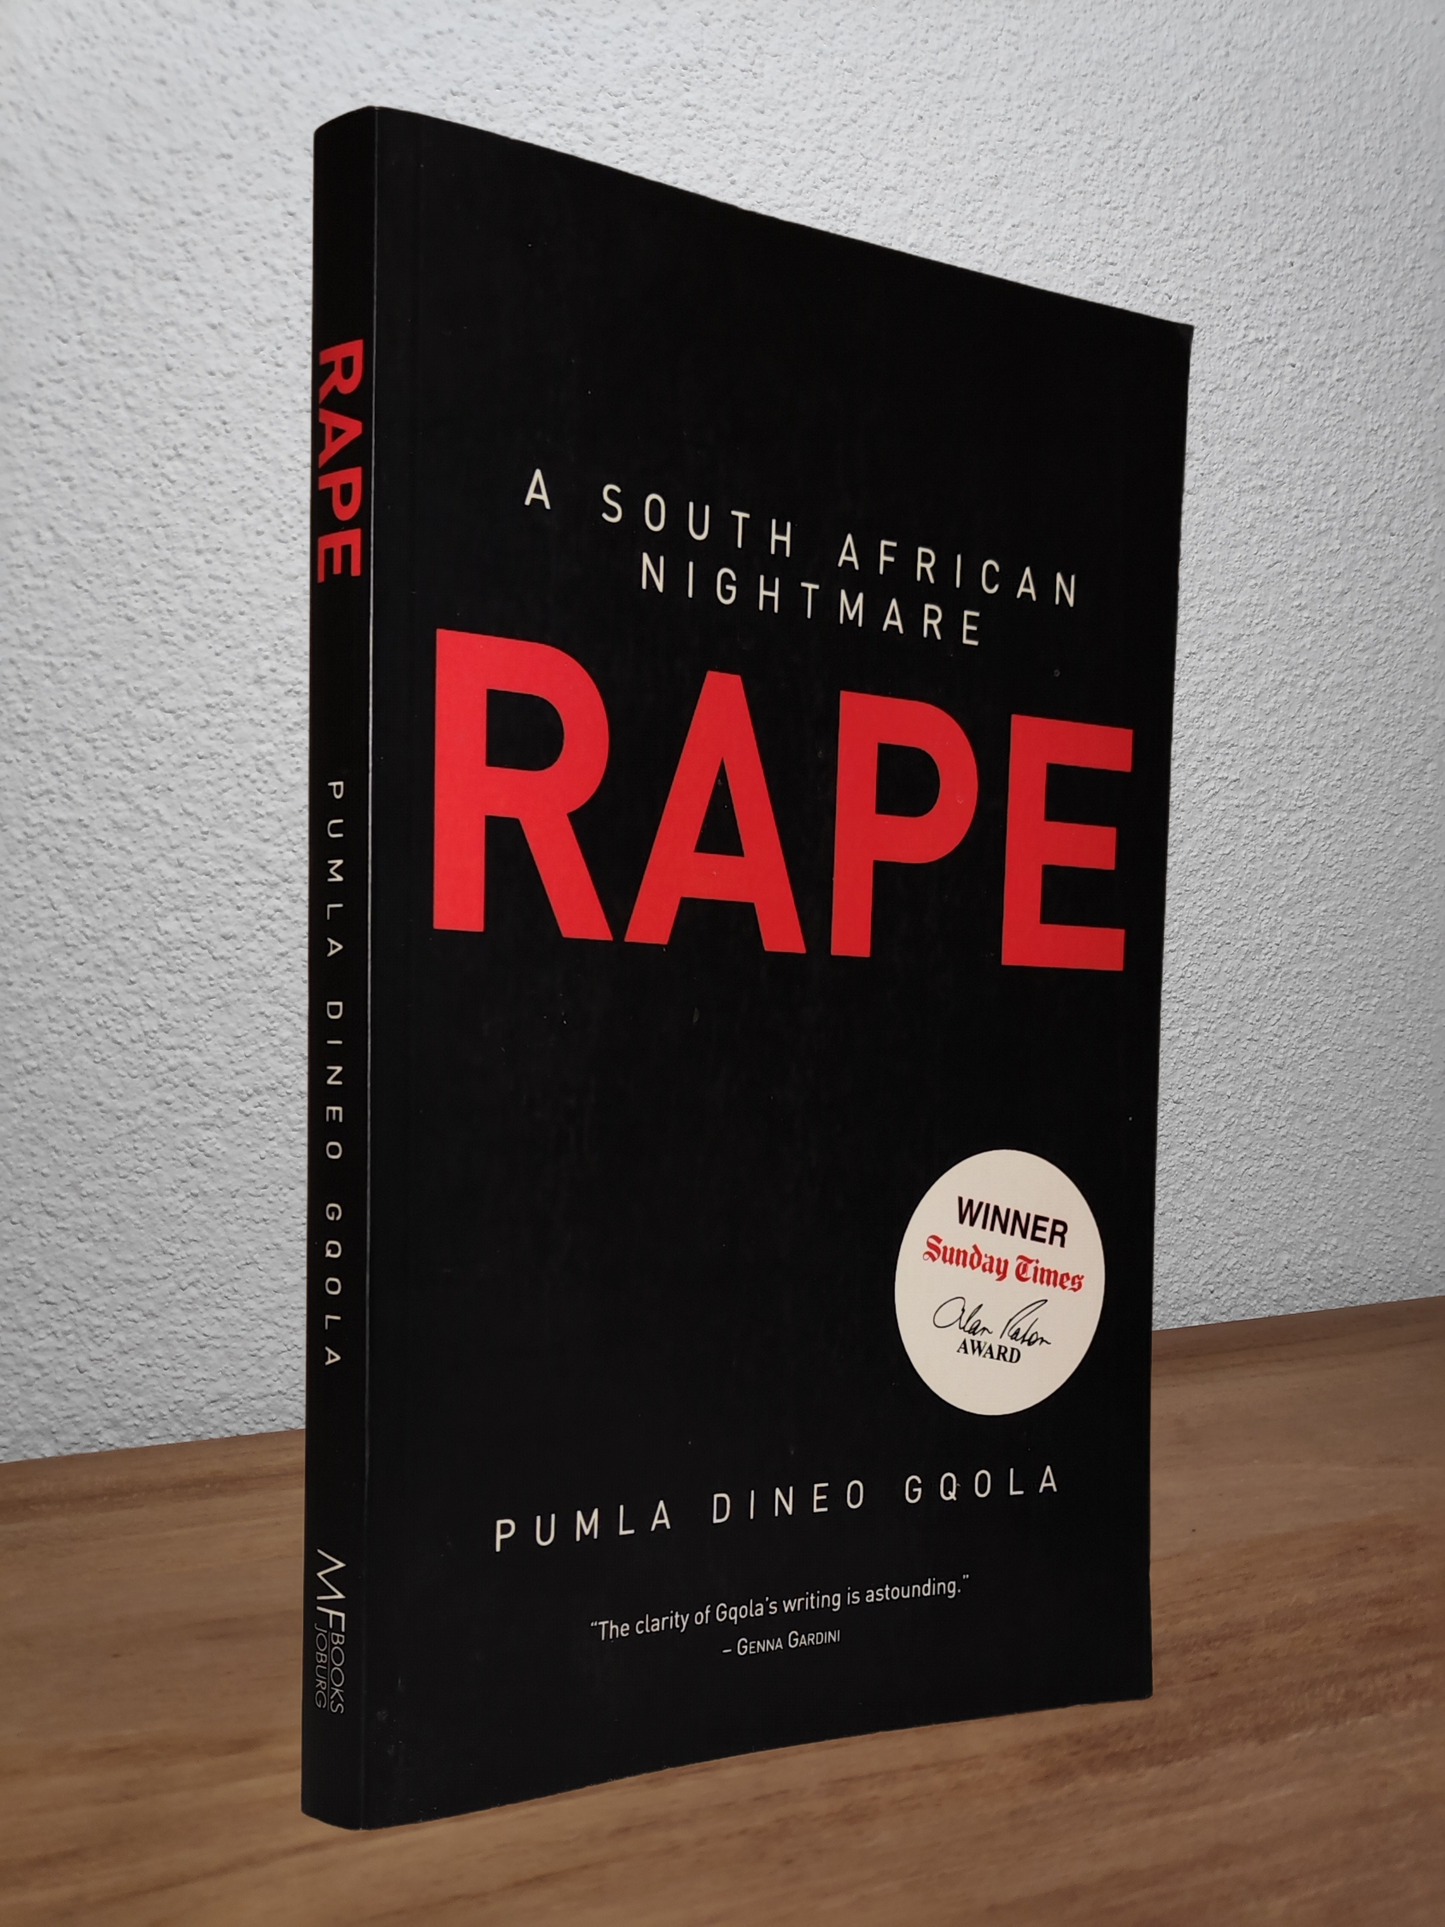 Pumla Dineo Gqola - Rape: A South African Nightmare  - Second-hand english book to deliver in Zurich & Switzerland